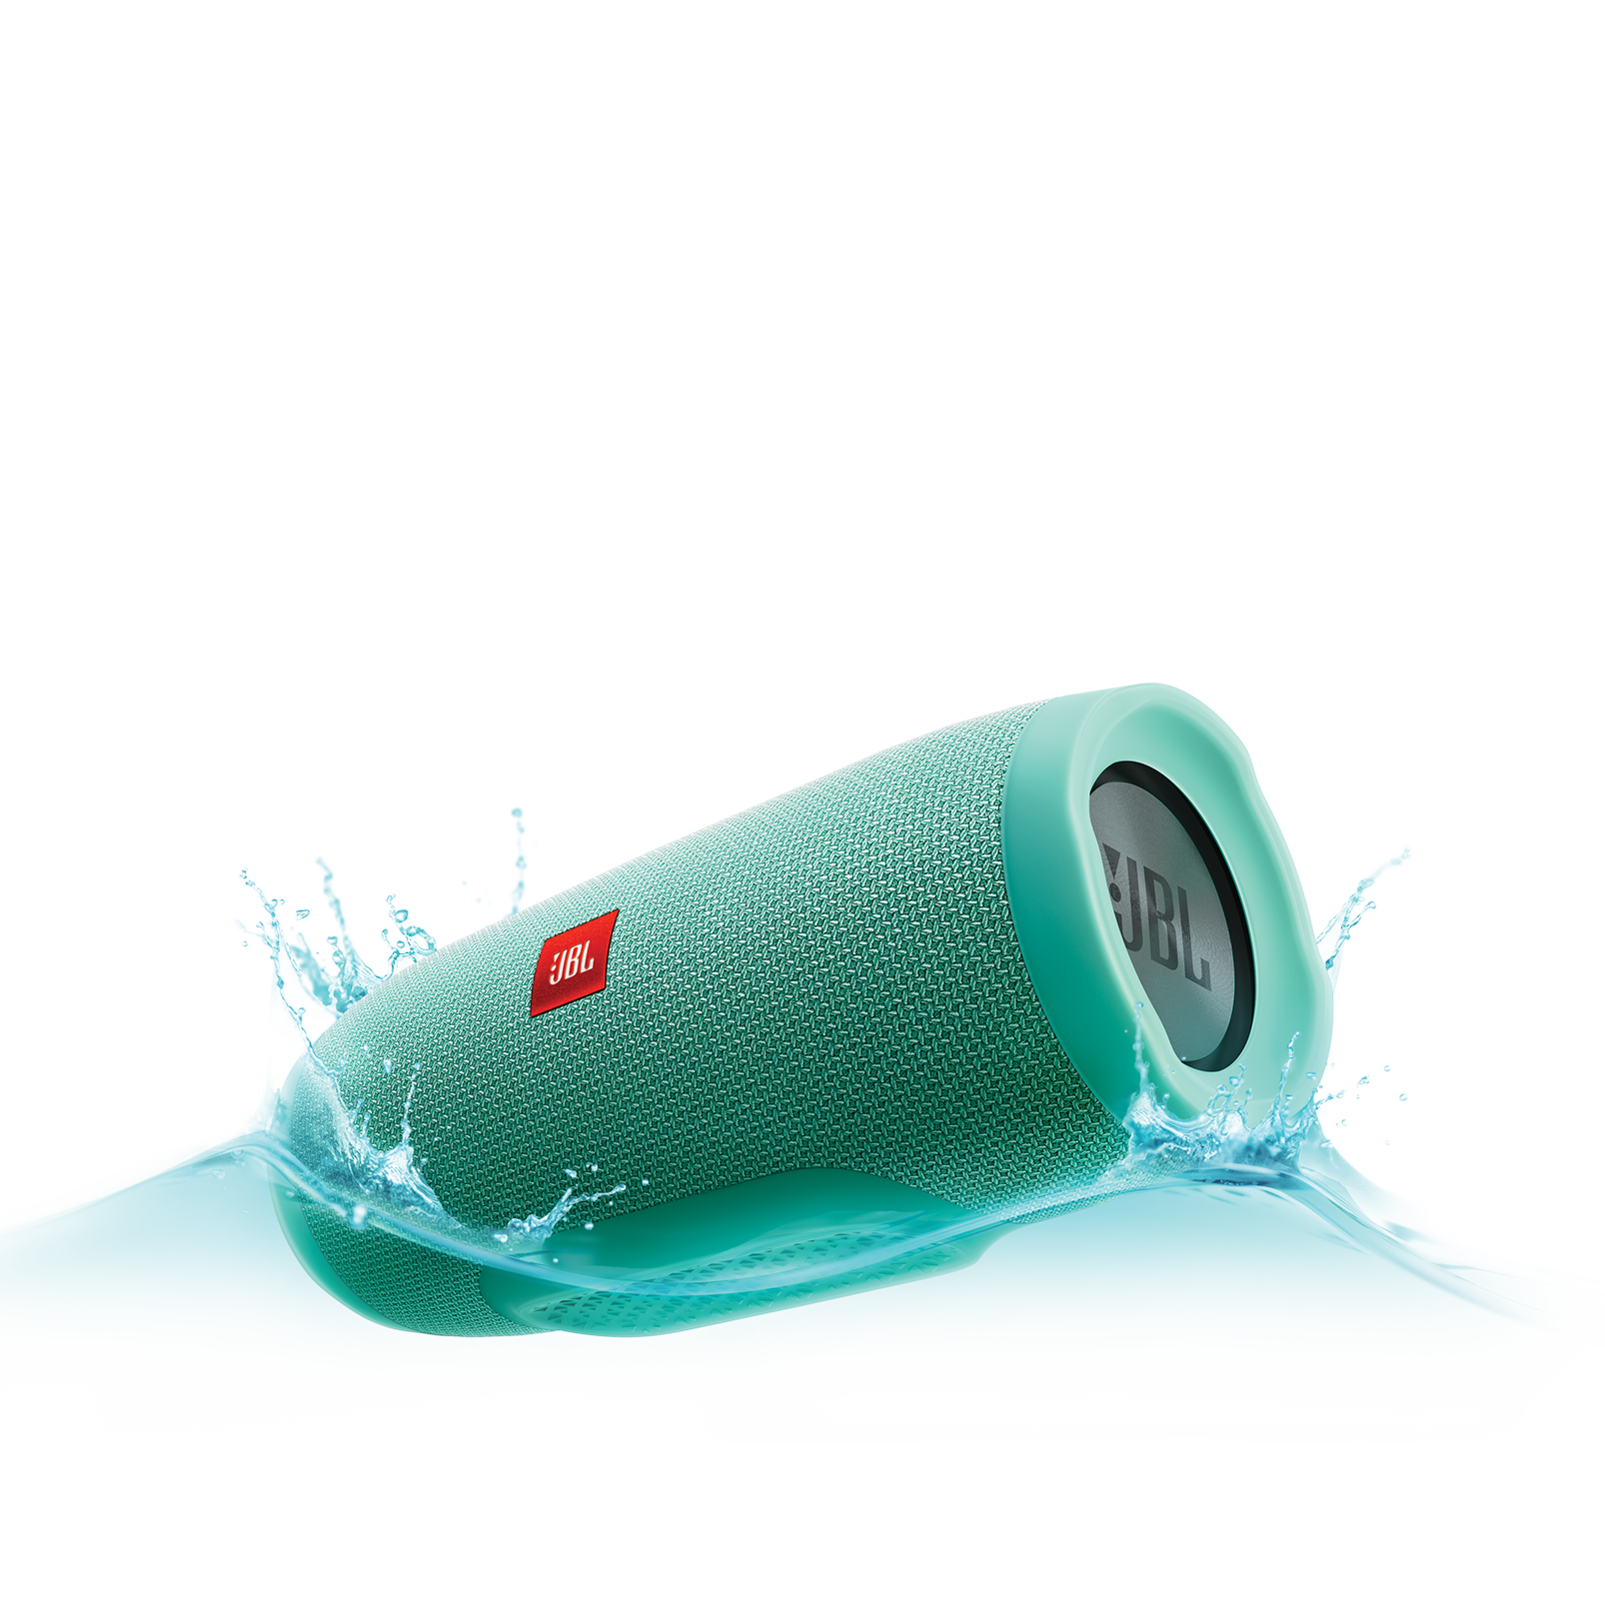 JBL CHARGE 3 Bluetooth スピーカー teal color